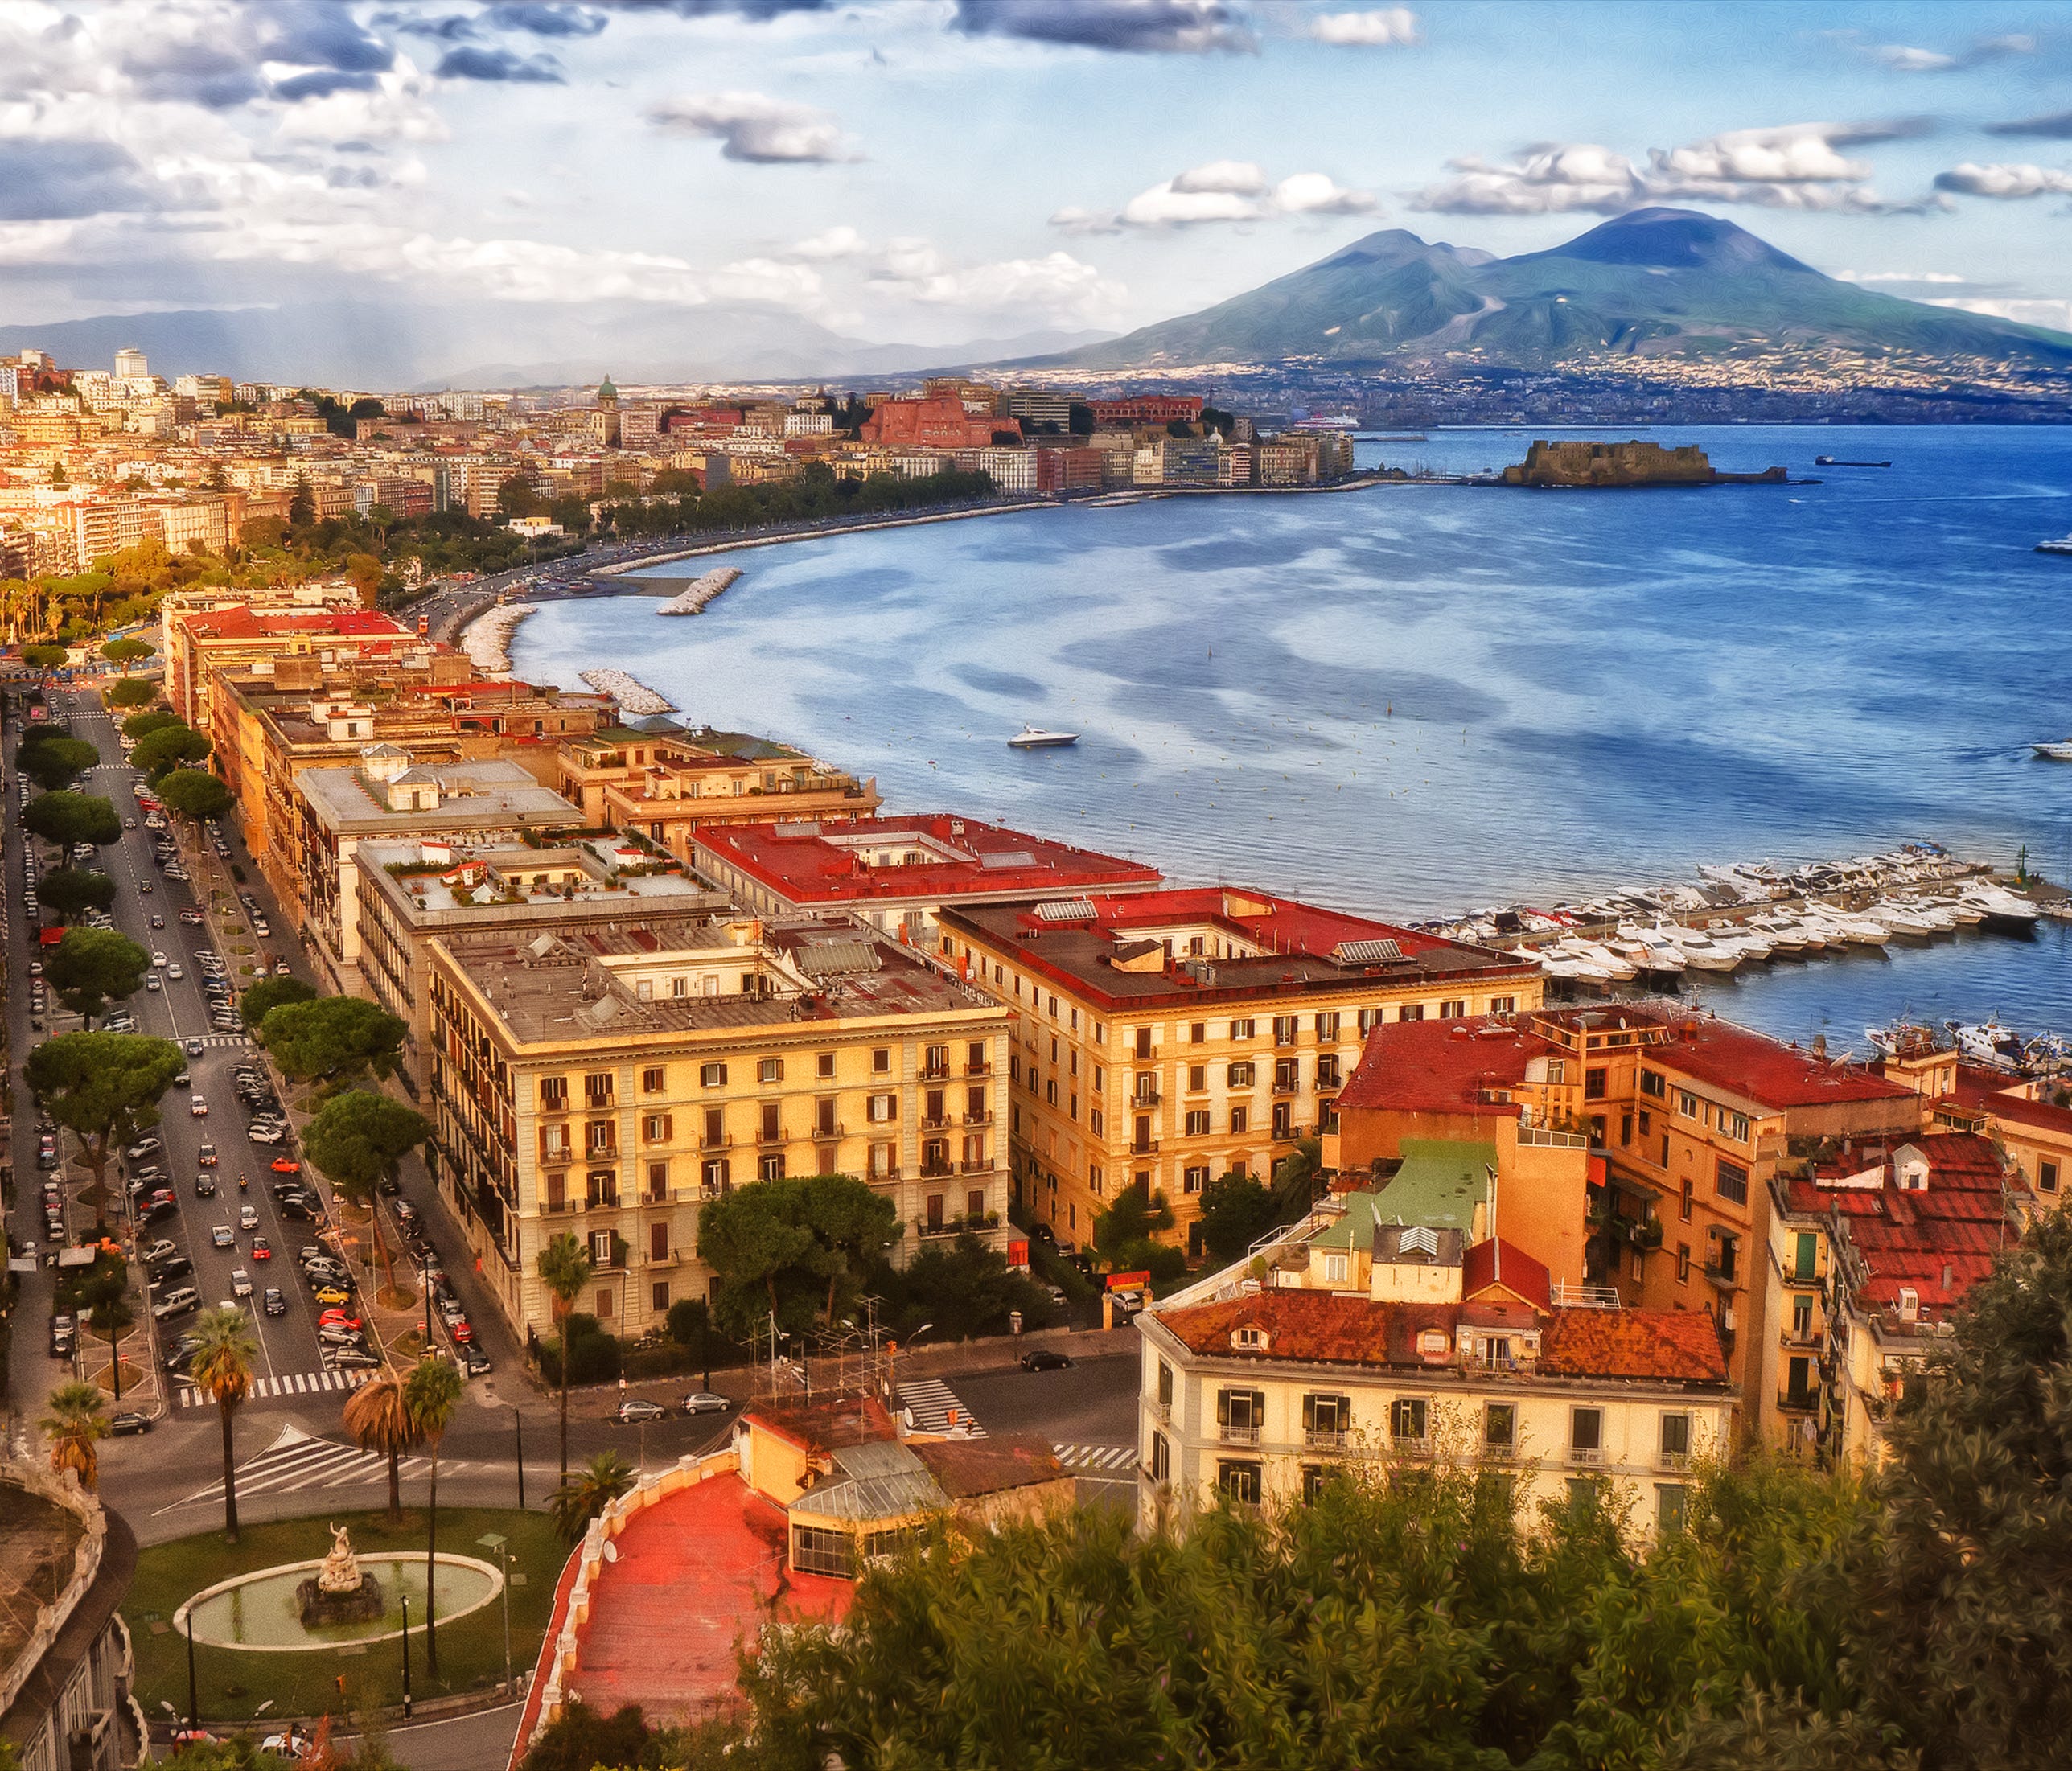 Florence-Naples: These two famous Italian cities are about 300 miles apart, and you can travel this train route in Europe much faster than flying. A one-way journey on ItaliaRail takes just two and a half hours as opposed to the five hours it takes t